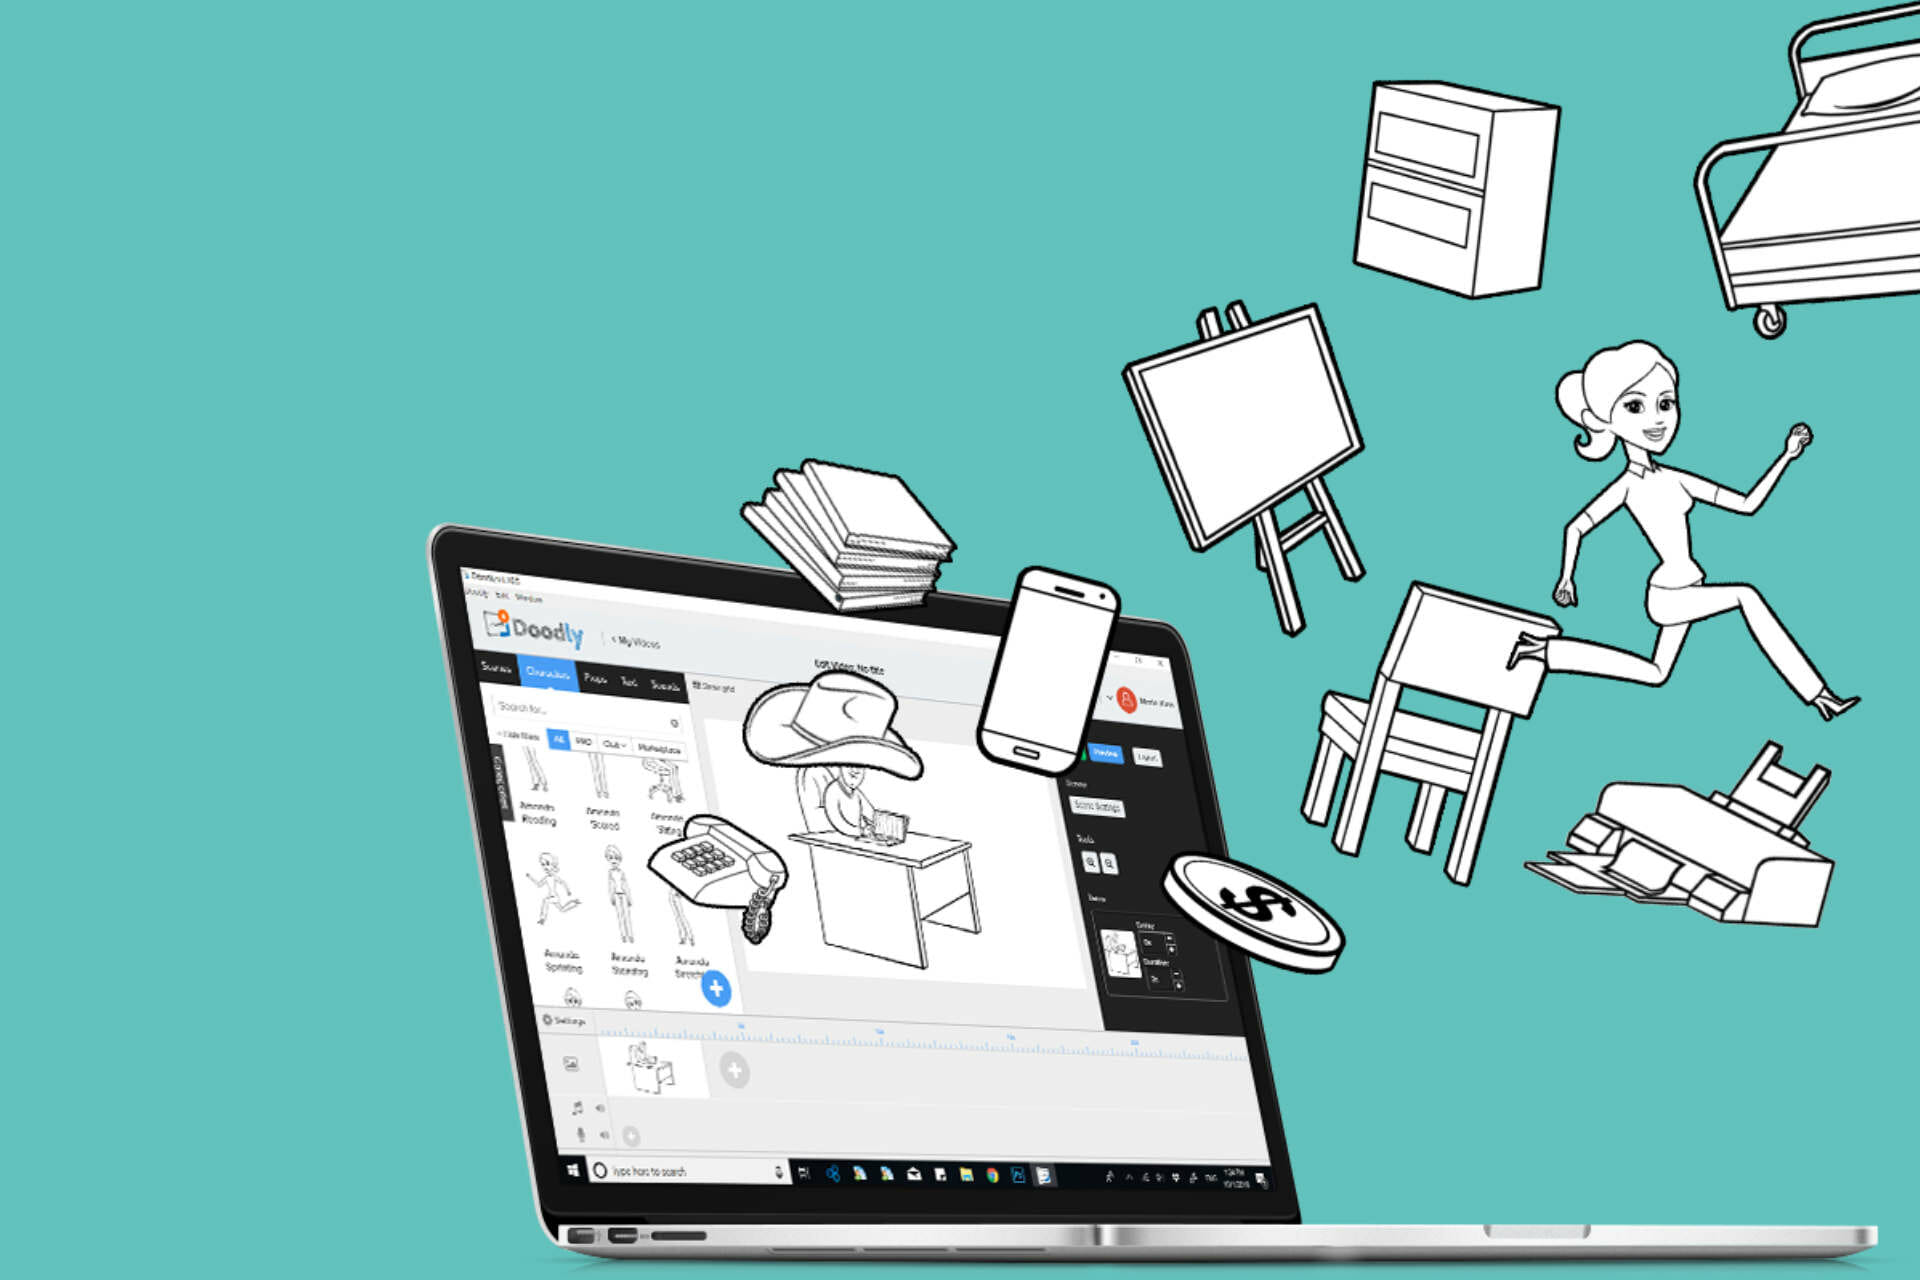 9 Best Whiteboard Animation Software In 2022 (Free & Paid)